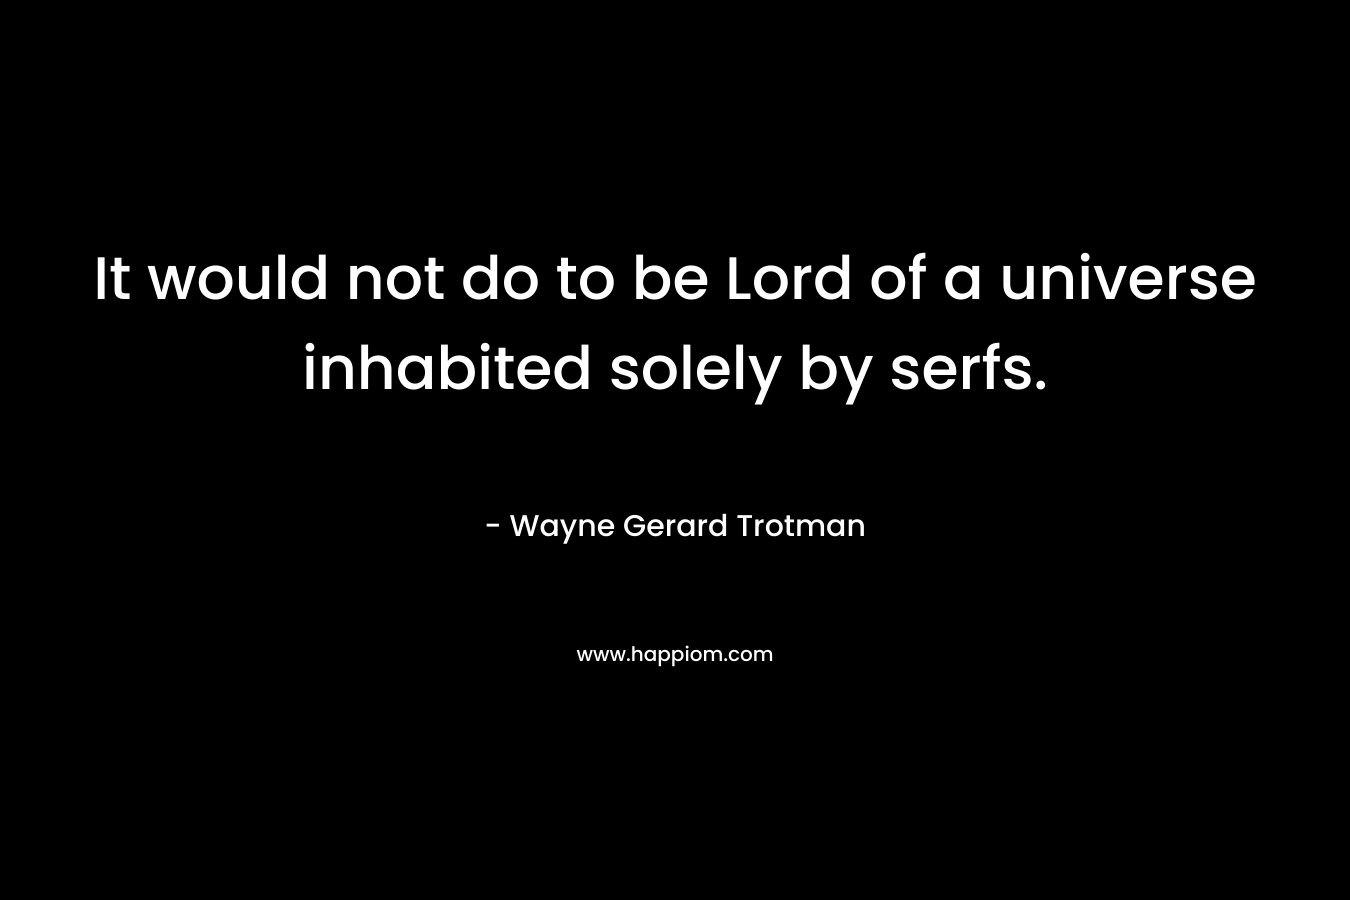 It would not do to be Lord of a universe inhabited solely by serfs. – Wayne Gerard Trotman